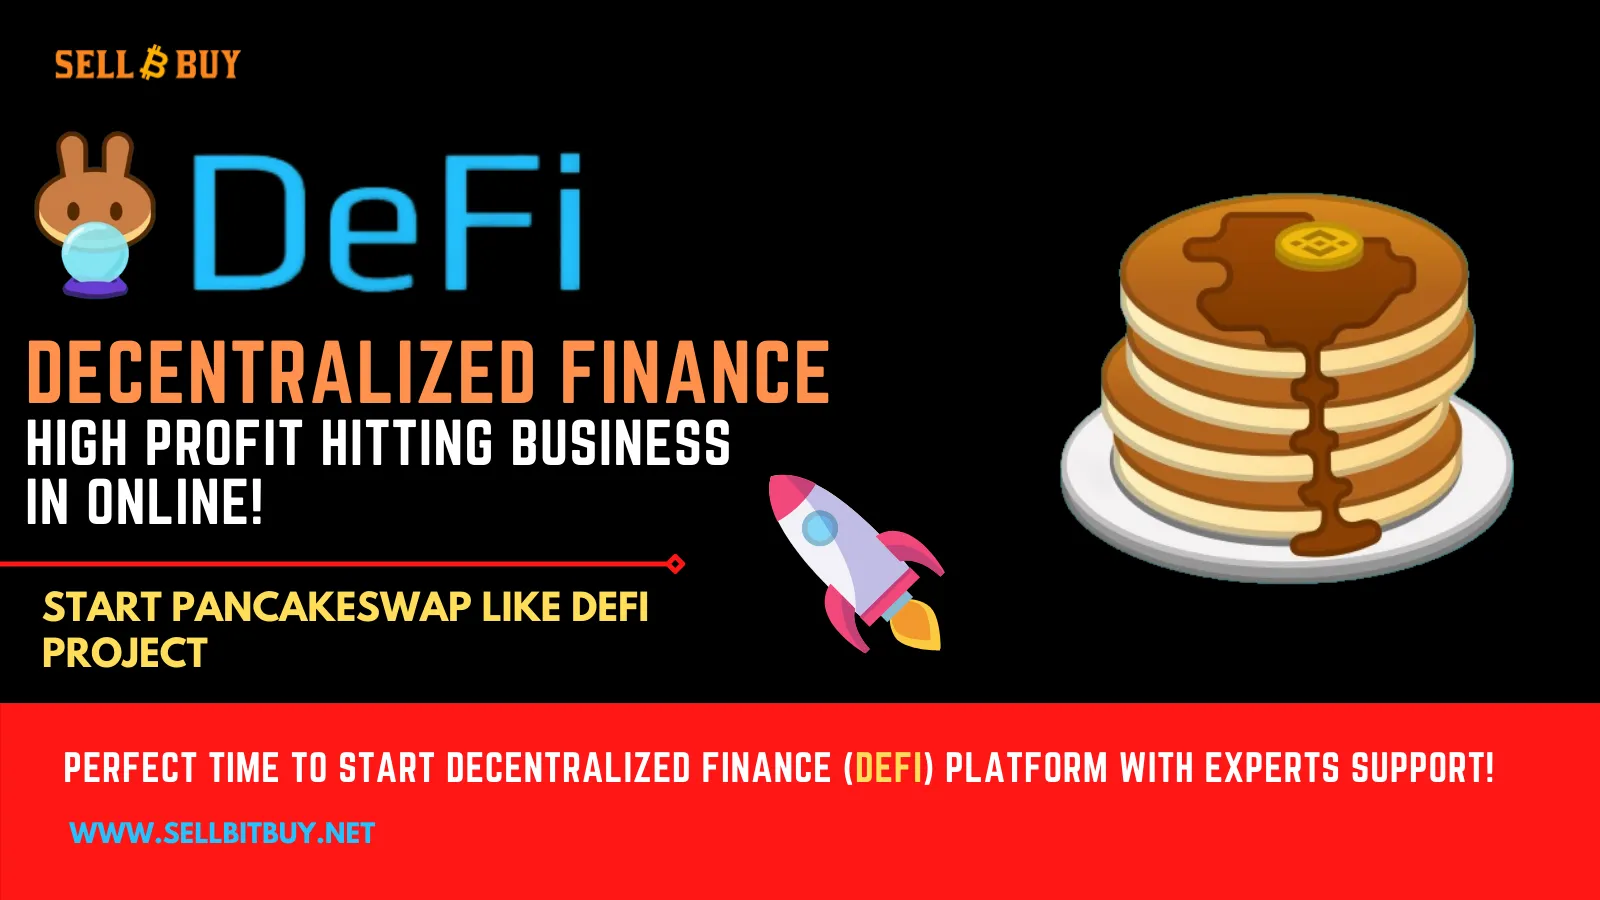 PancakeSwap Is Rising - Great Solution For Business Startups